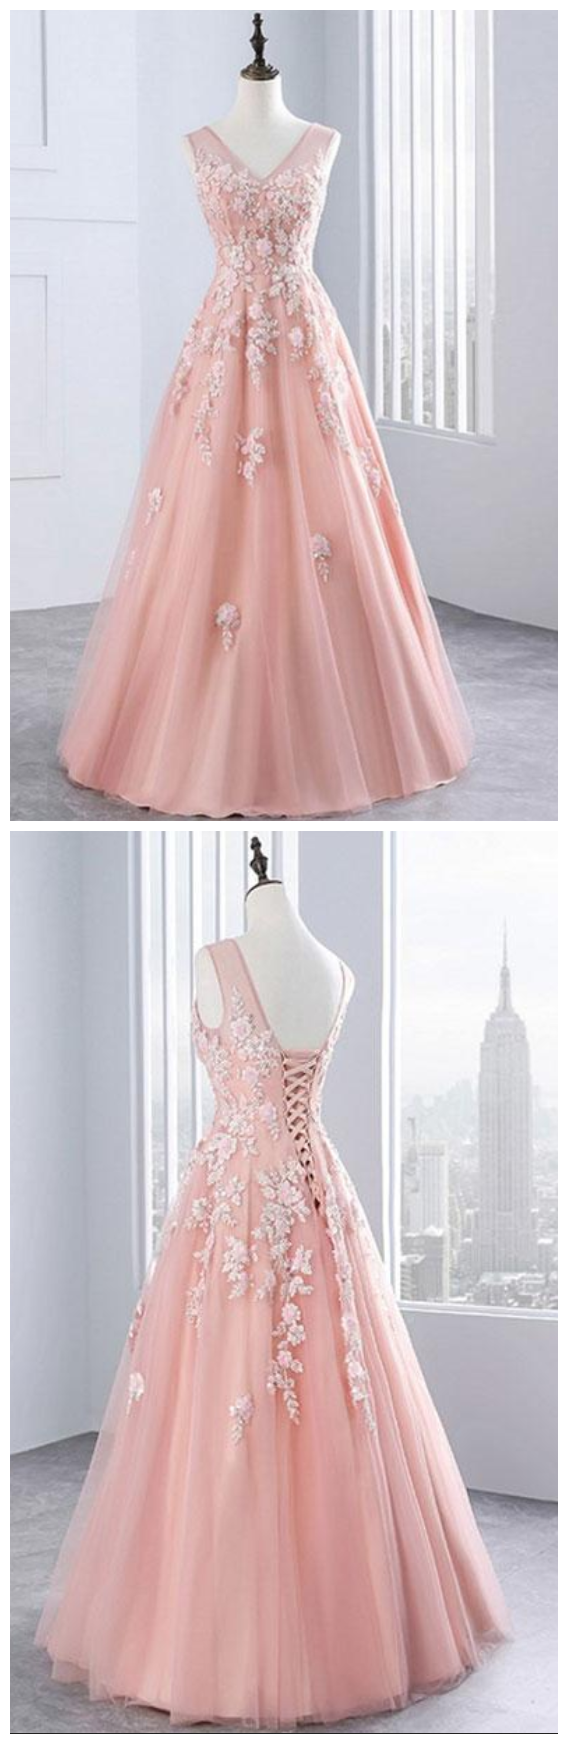 Custom Made Pink Sleeveless V-neckline Tulle Floor Length Evening Dress, Prom Dress With Lace Applique